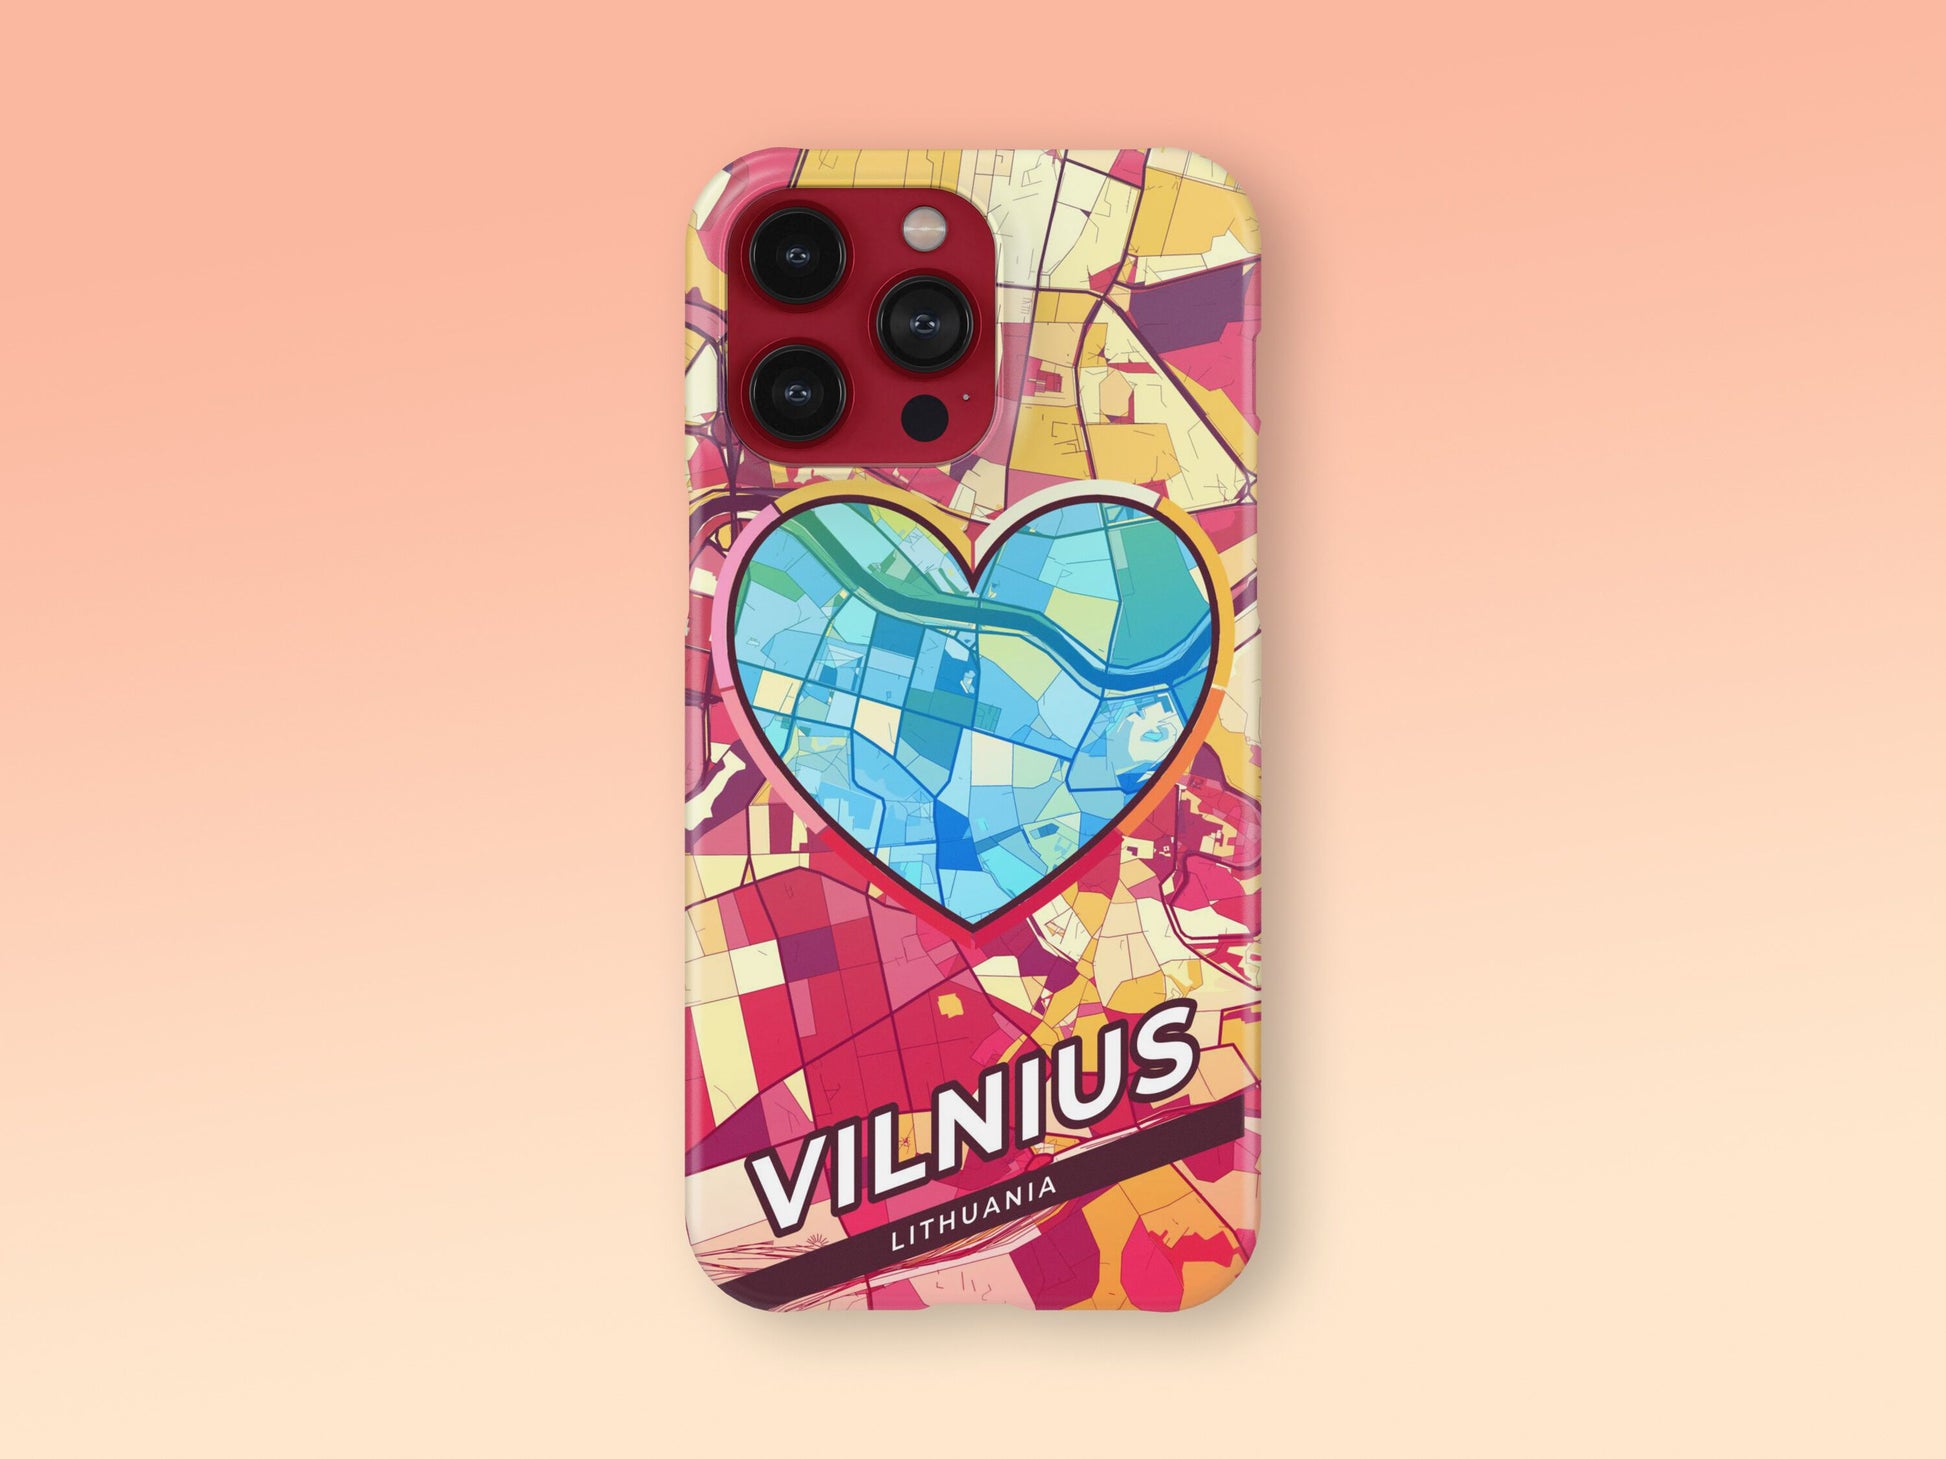 Vilnius Lithuania slim phone case with colorful icon 2